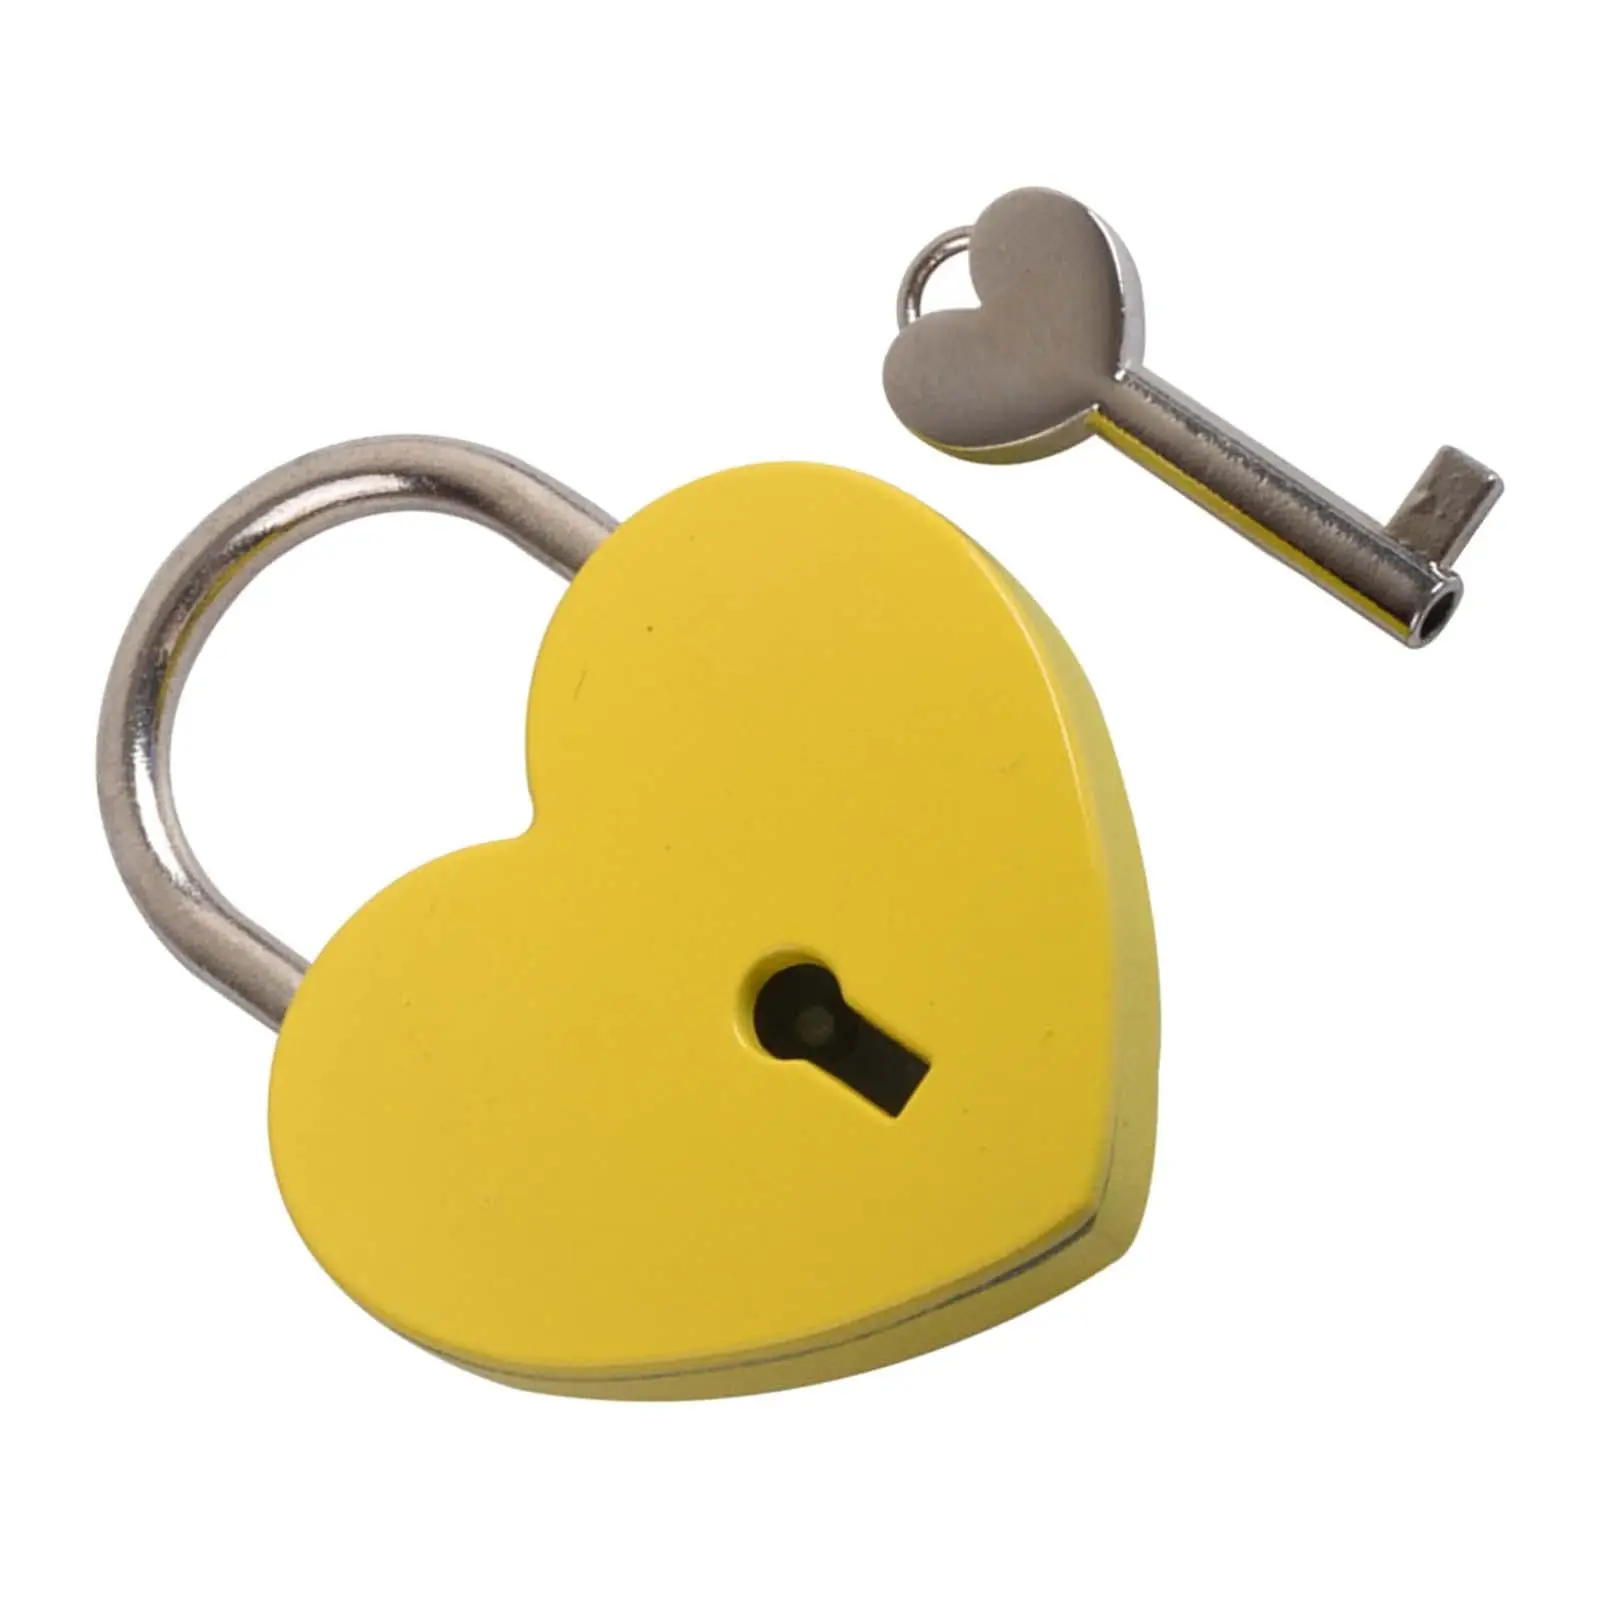  Multicolor with Keys Blessing Luggage Lock Shaped Padlock for Travel Locker Classroom Lovers Diary Book